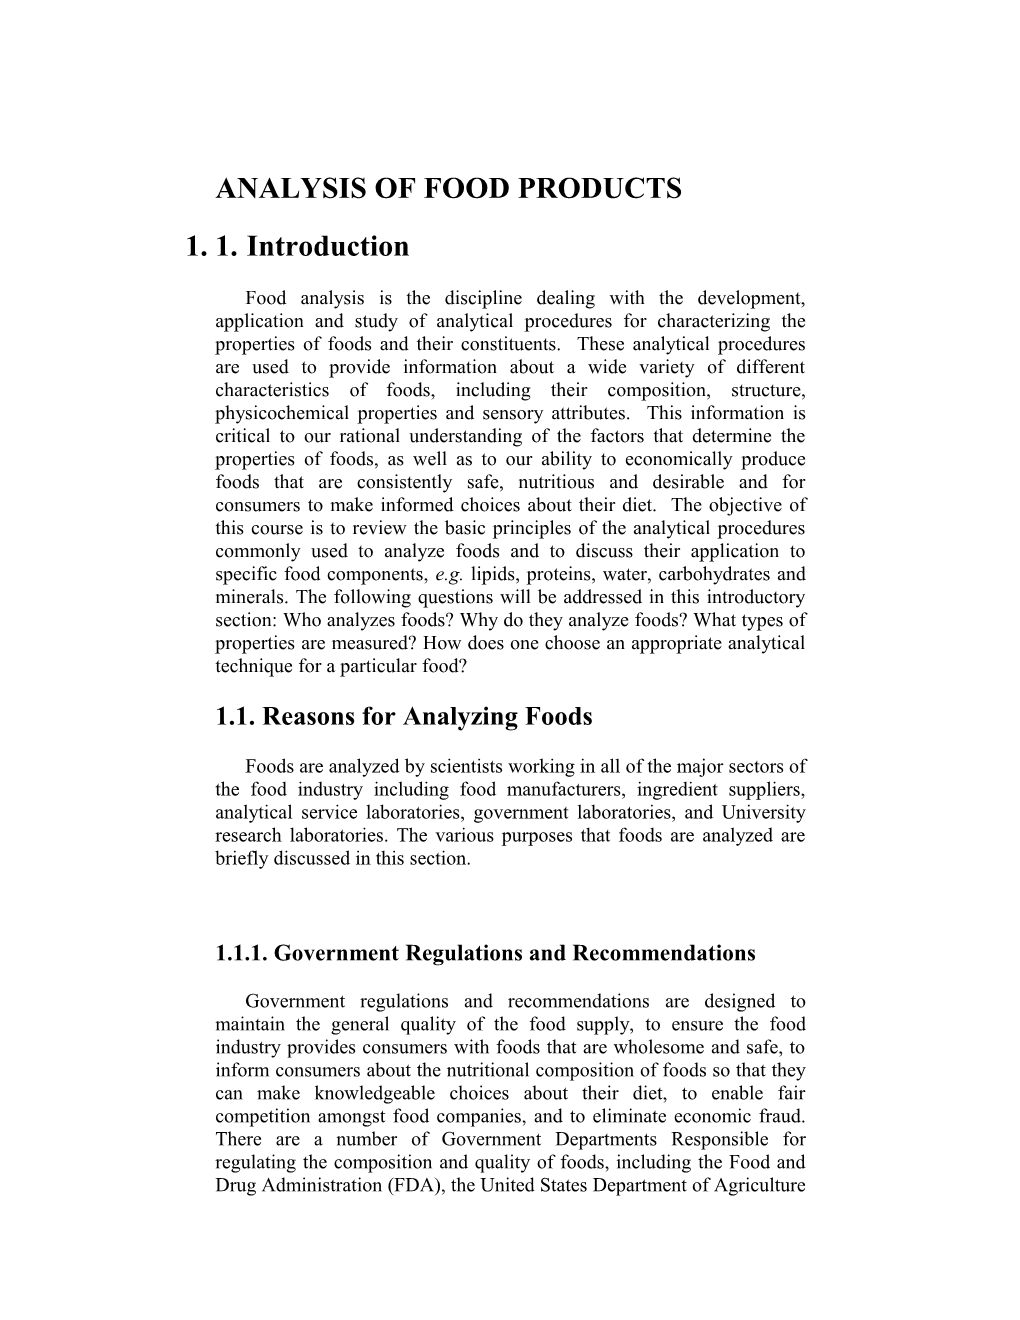 Analysis of Food Products